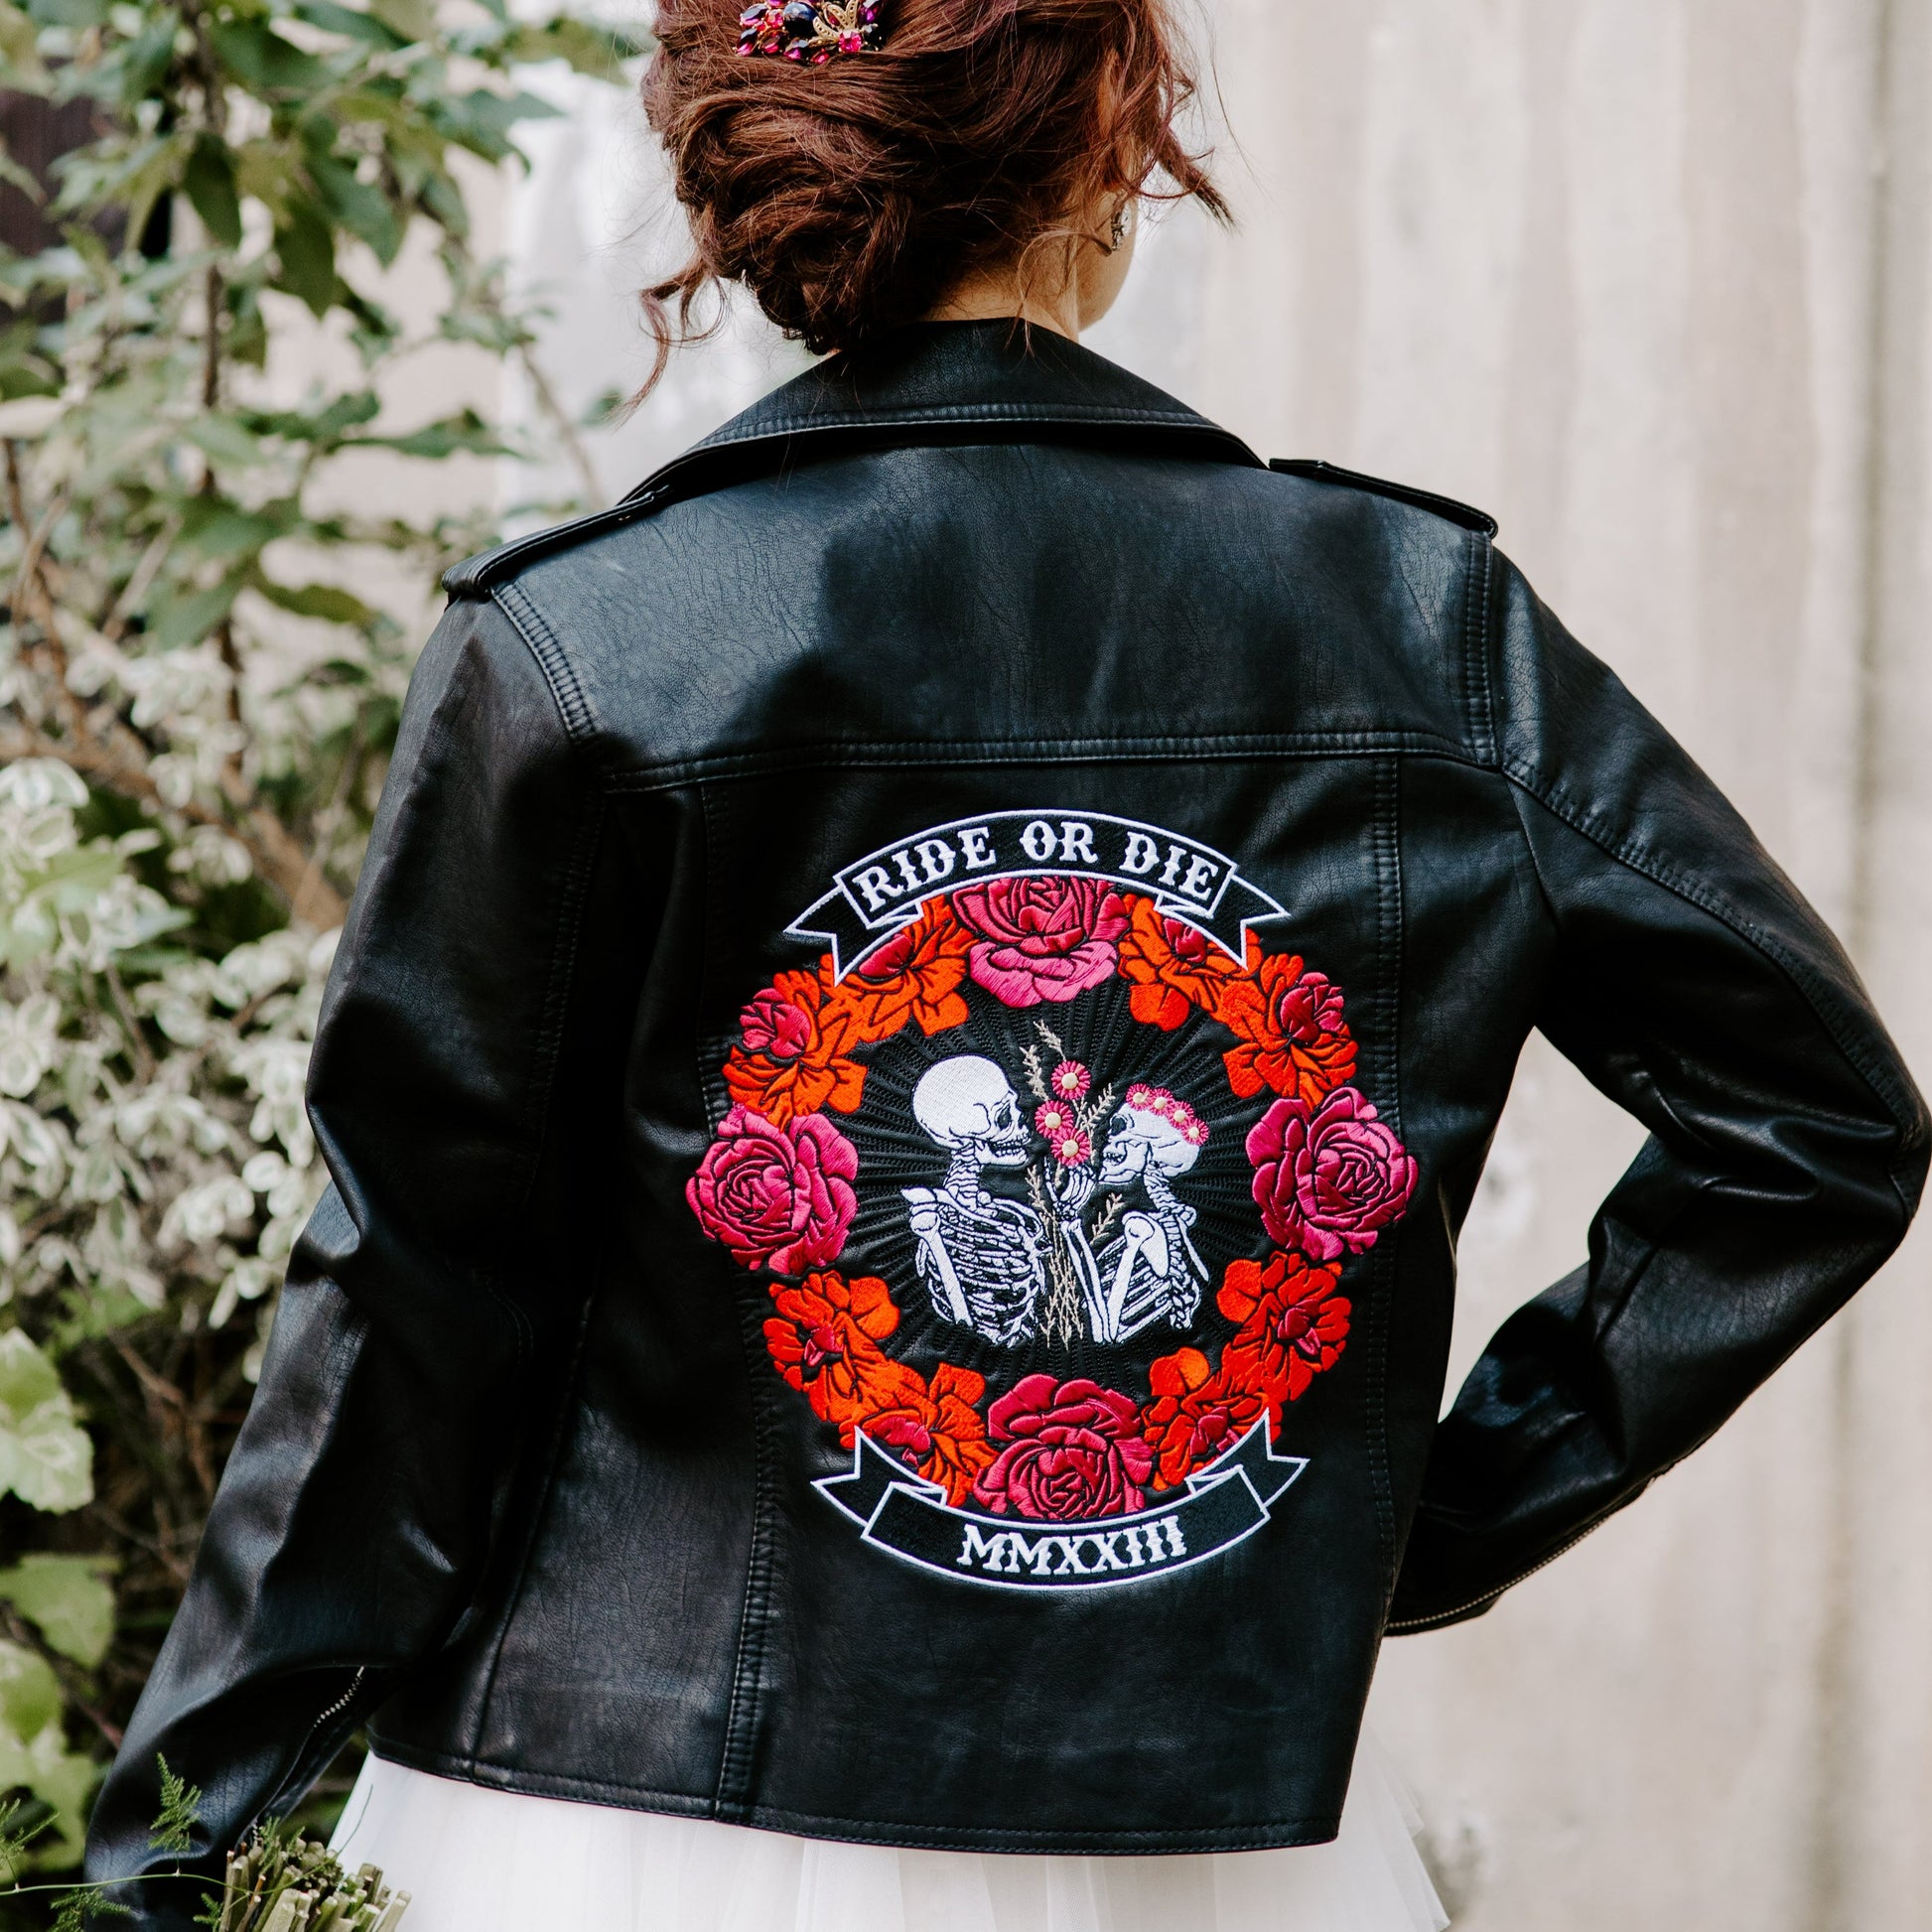 Ride Or Die Floral Skeleton Couple Black Leather Bridal Jacket – a bold and unique cover-up for a rebelliously romantic wedding look